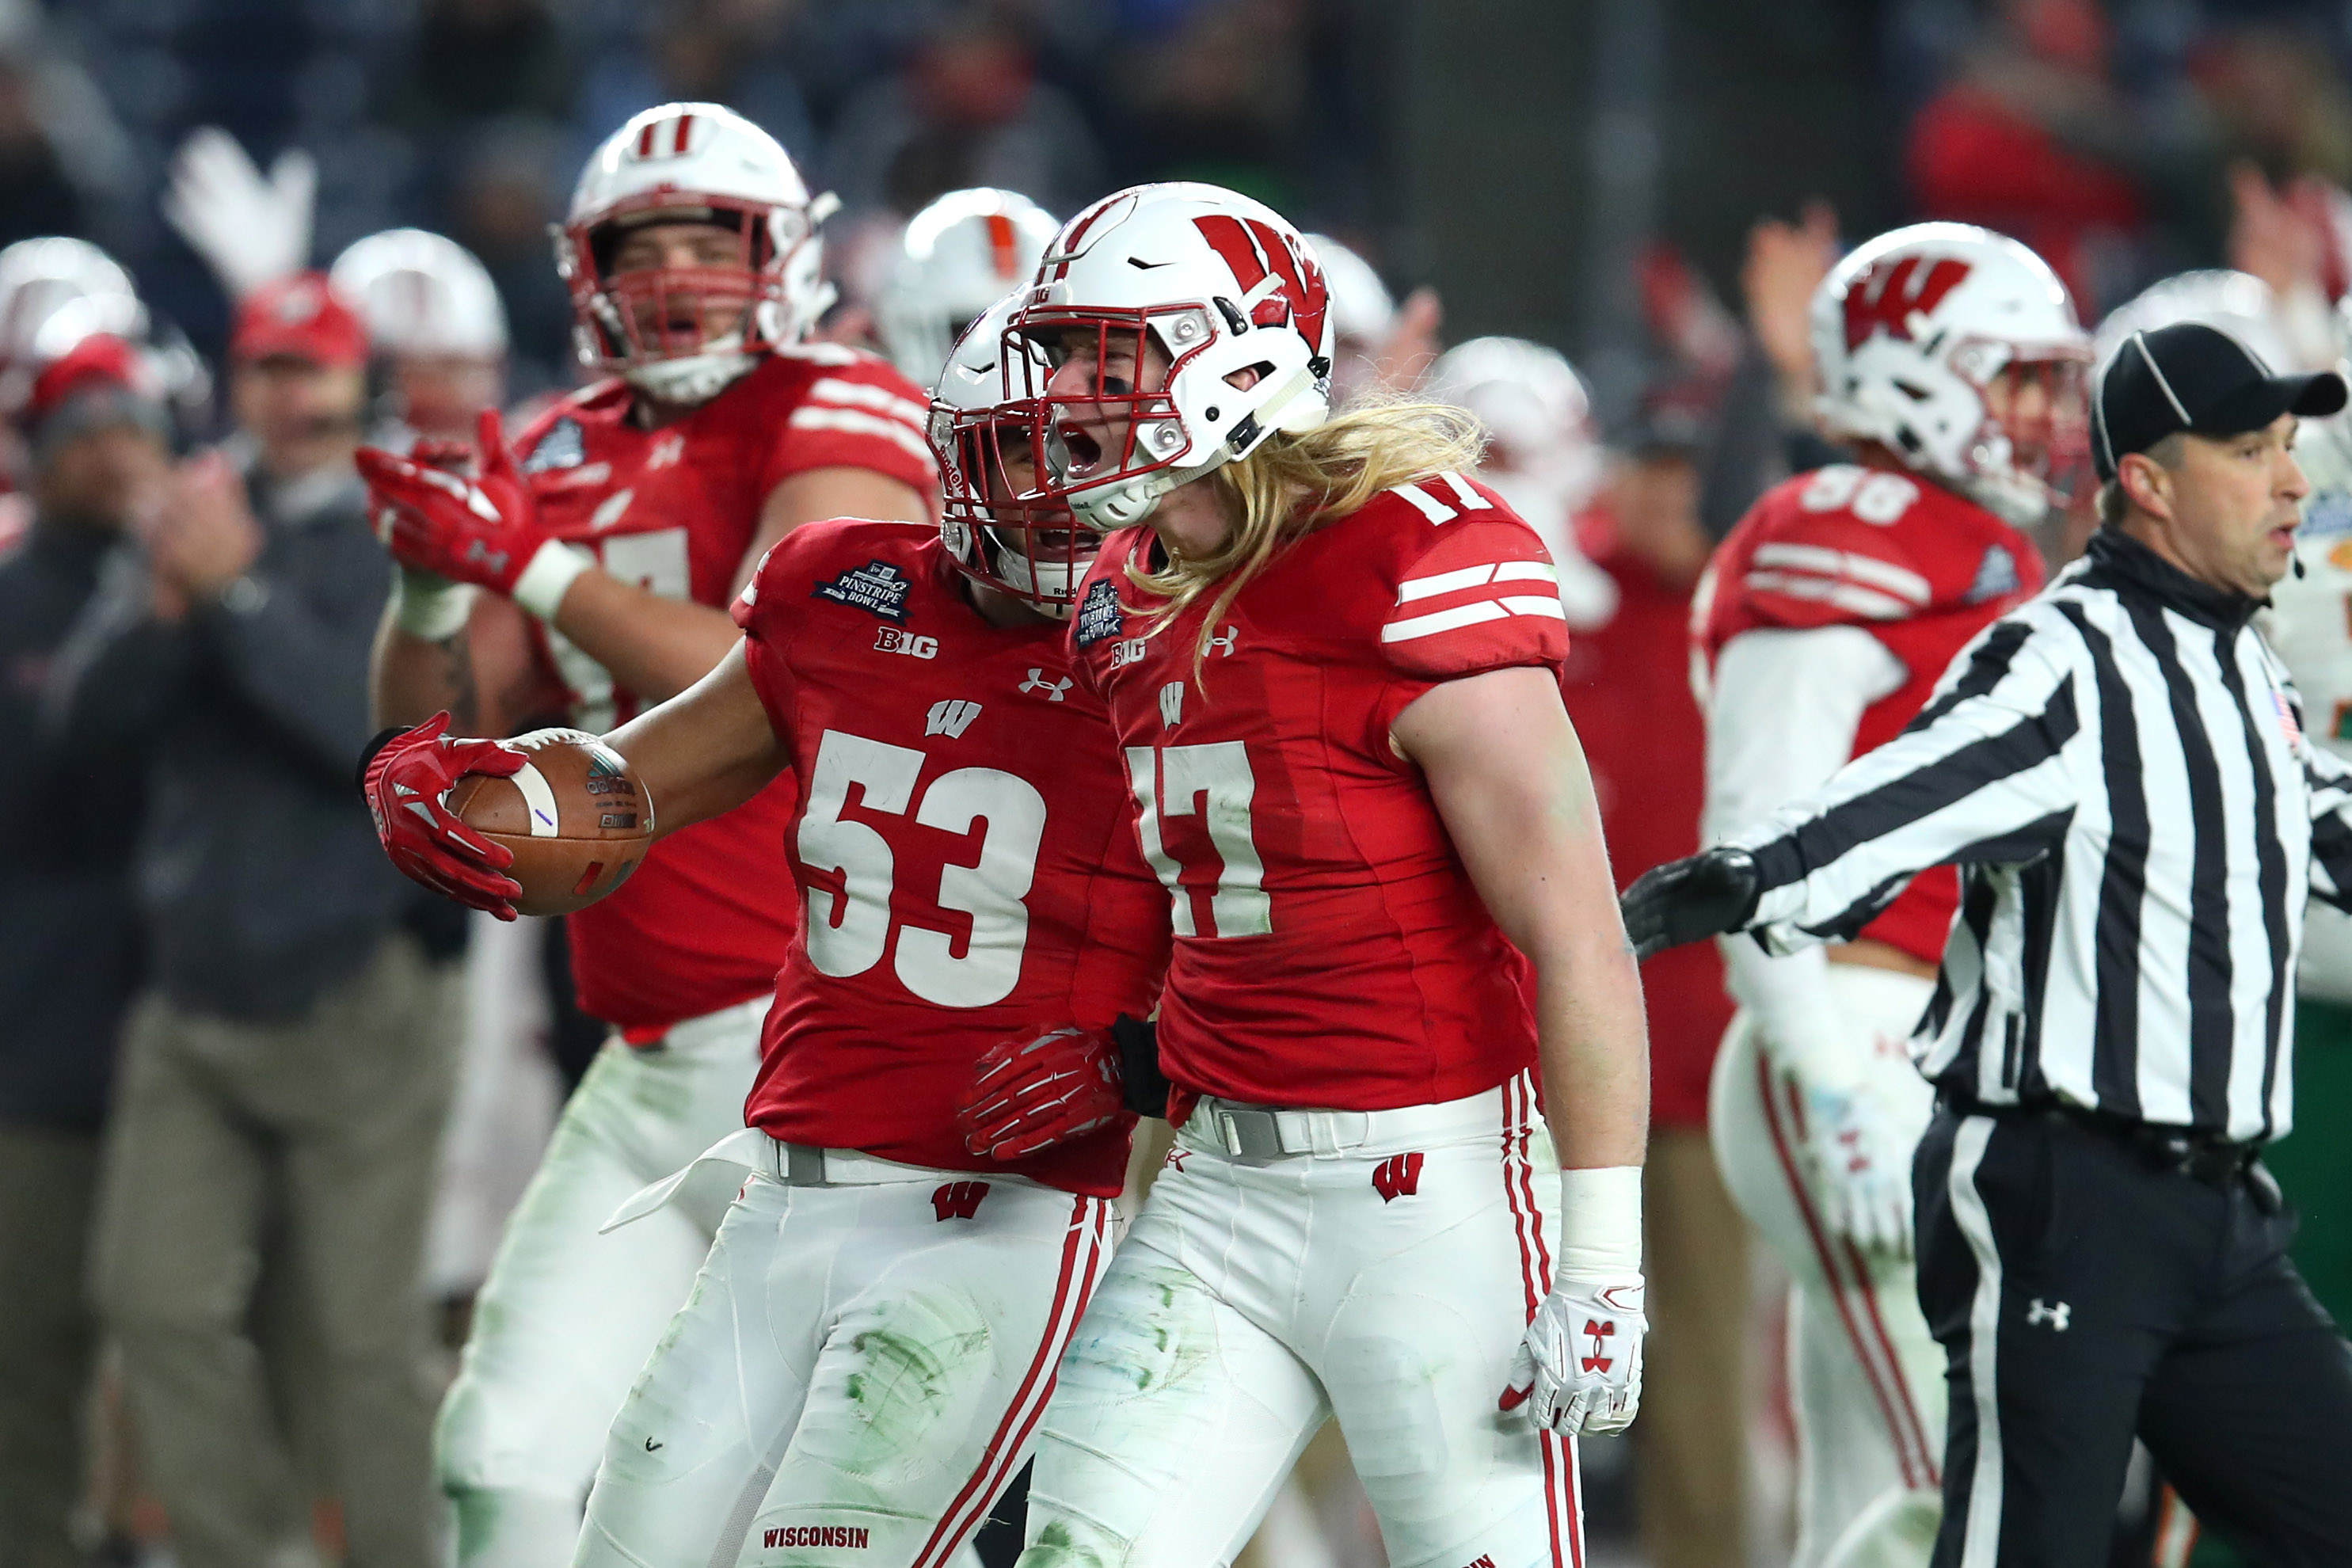 Dec 27, 2018; Bronx, NY, USA; Wisconsin Badgers linebacker Andrew Van Ginkel (17) reacts to a defensive play with teammate linebacker T.J. Edwards (53) against the Miami Hurricanes during the second quarter in the 2018 Pinstripe Bowl at Yankee Stadium. Mandatory Credit: Rich Barnes-USA TODAY Sports